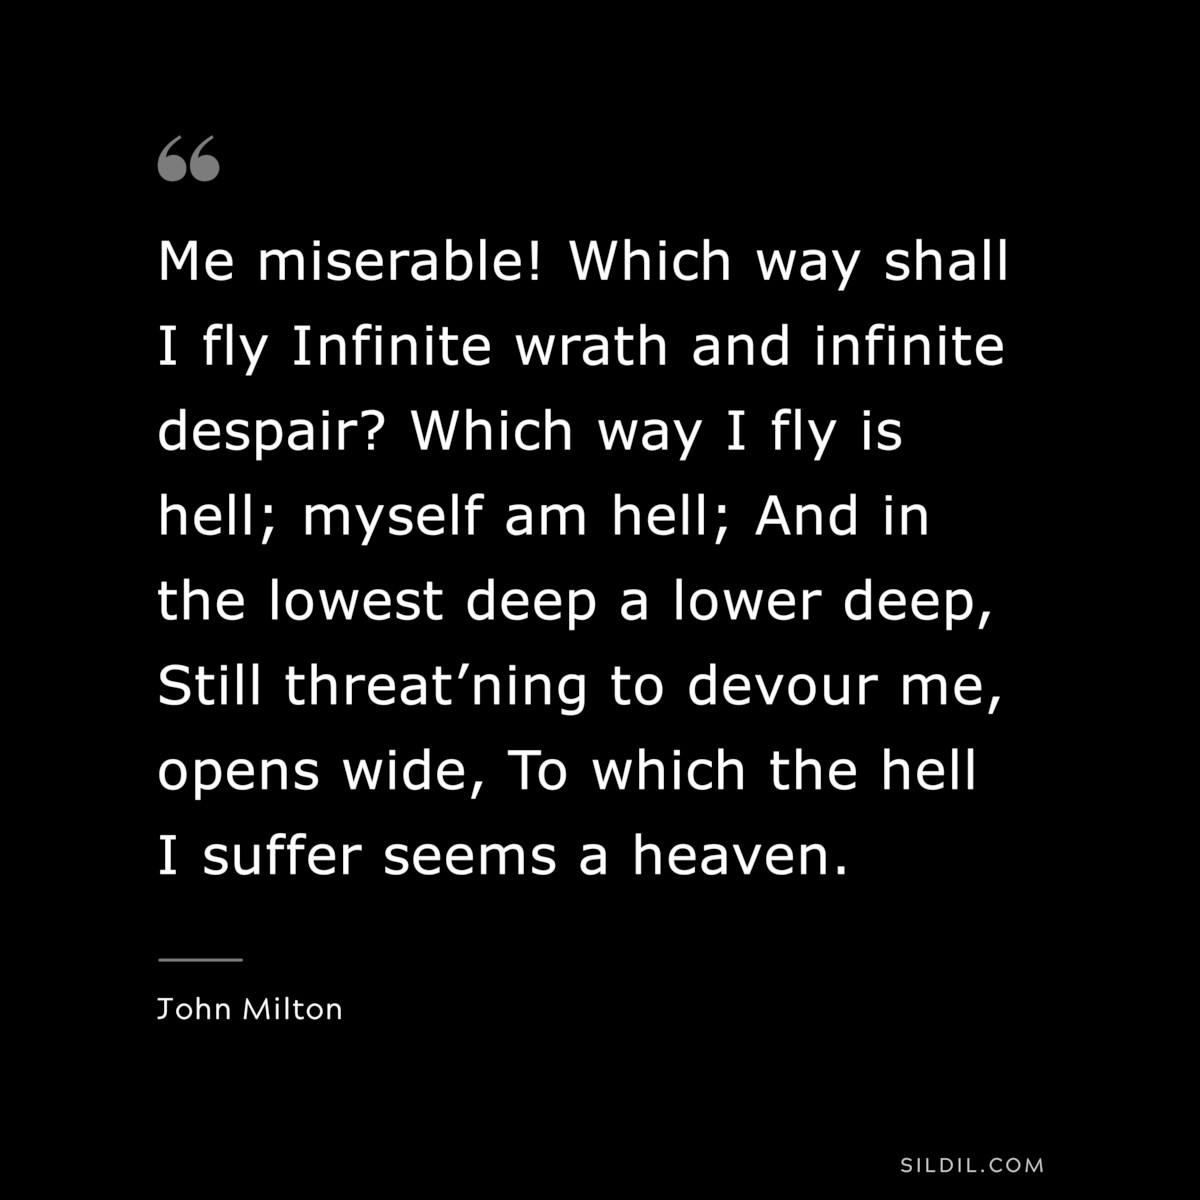 Me miserable! Which way shall I fly Infinite wrath and infinite despair? Which way I fly is hell; myself am hell; And in the lowest deep a lower deep, Still threat’ning to devour me, opens wide, To which the hell I suffer seems a heaven. ― John Milton